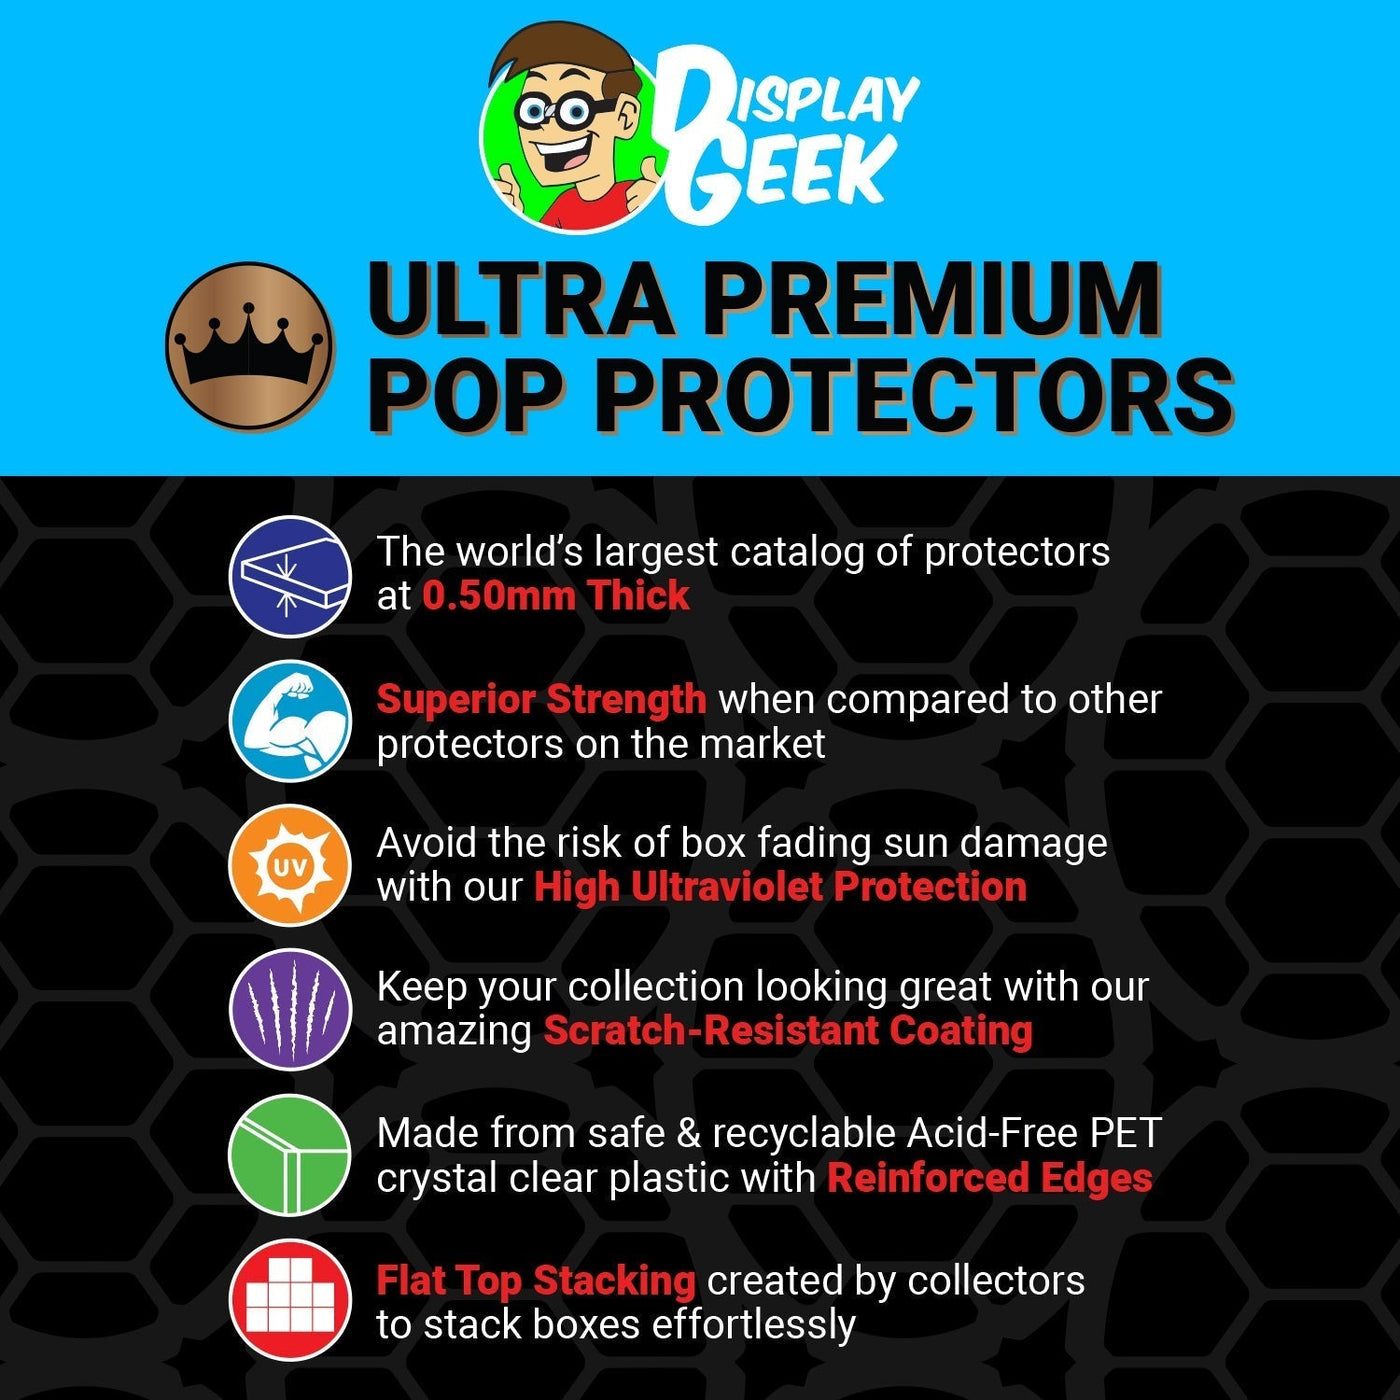 Pop Protector for Jollibee on Delivery Bike Funko Pop Rides on The Protector Guide App by Display Geek